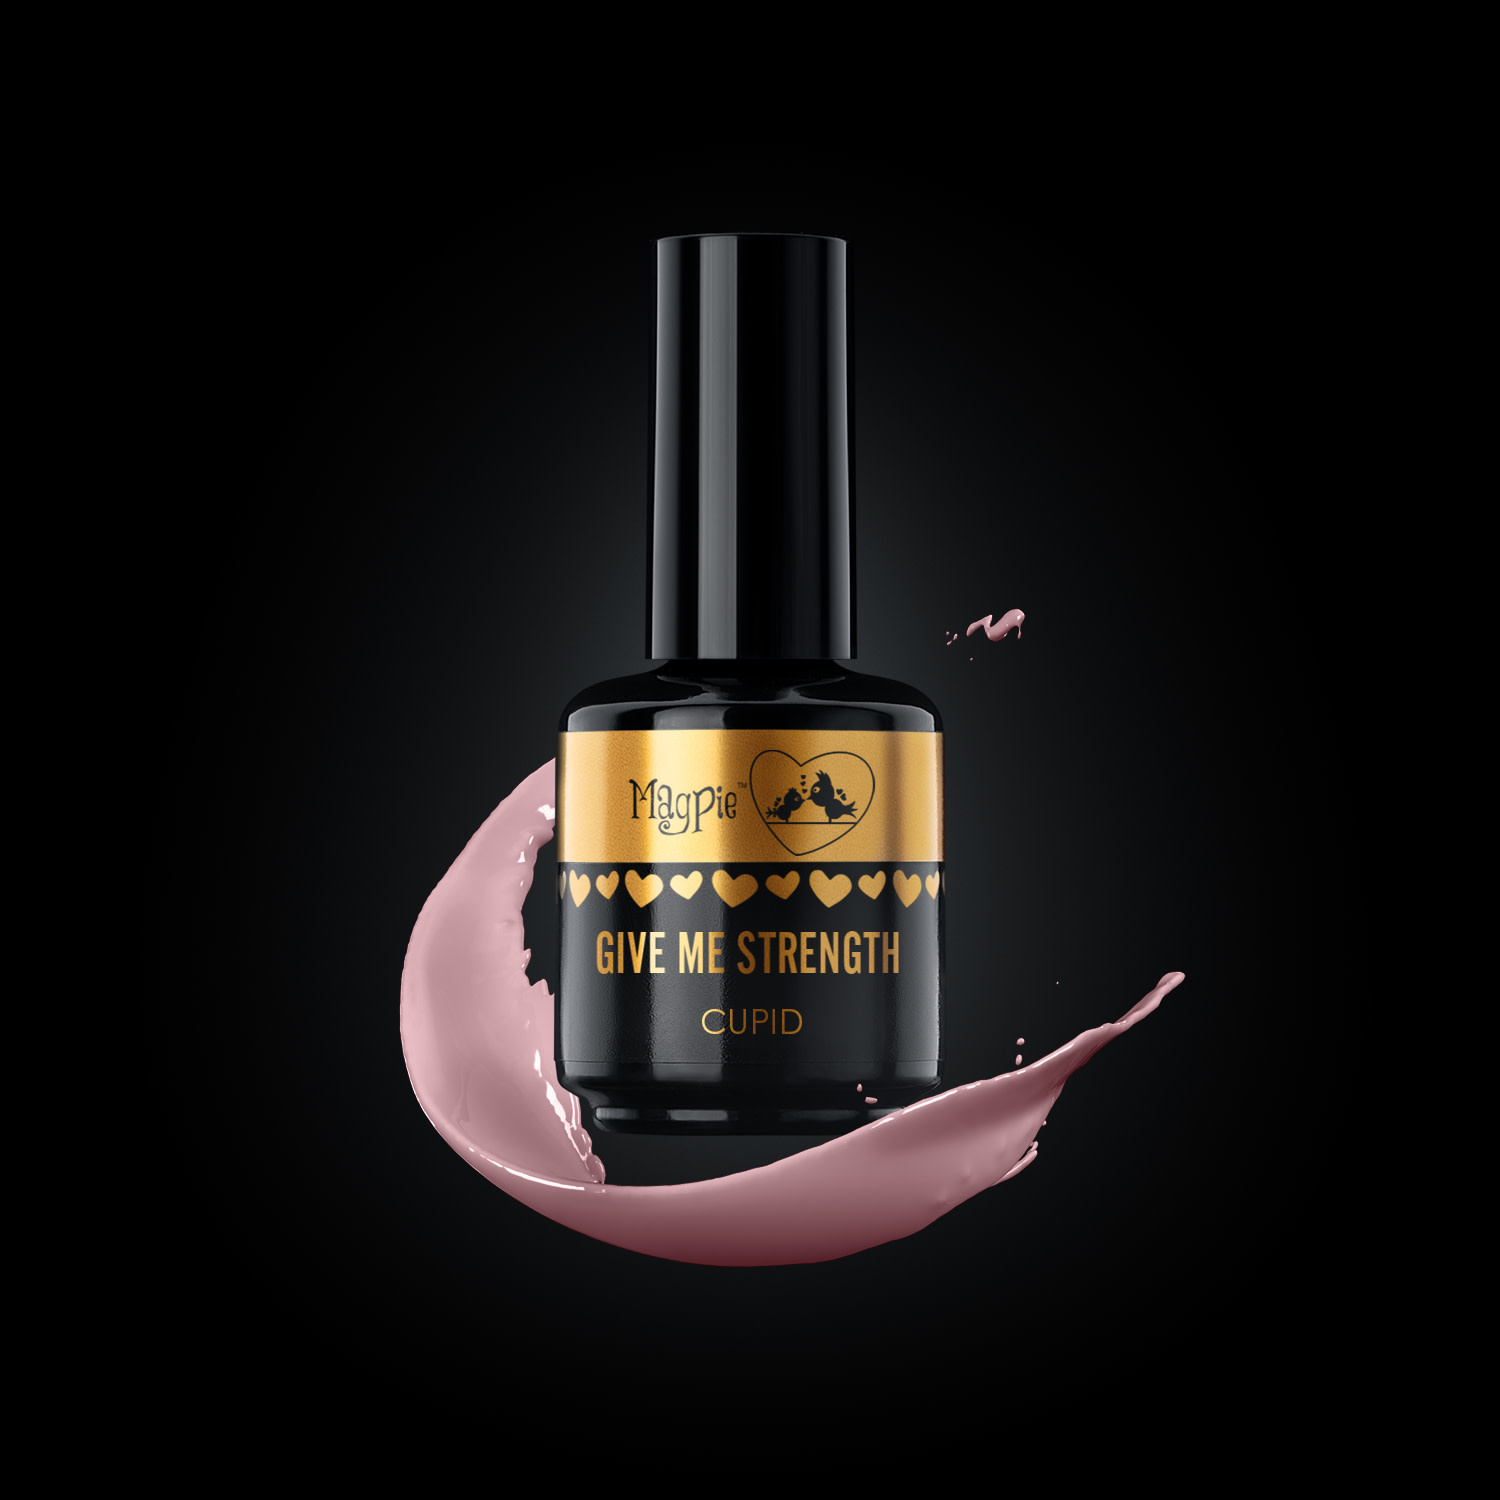 Magpie Give me Strength cupid 15ml MP